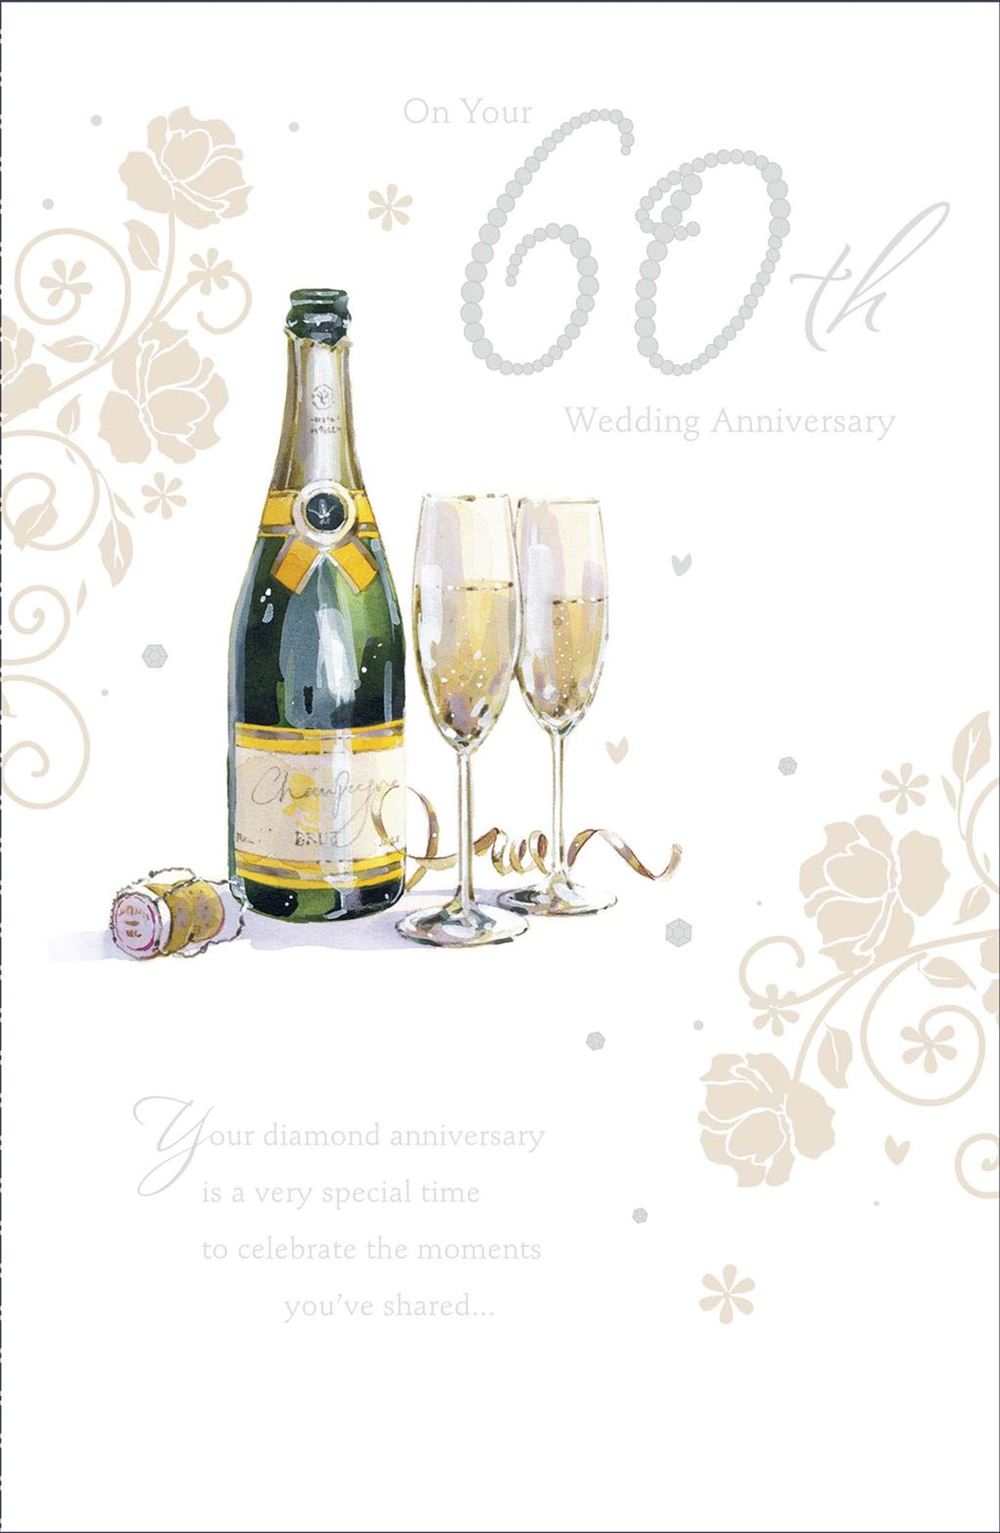 60th Wedding Anniversary Card - A Champagne Toast And Flowers